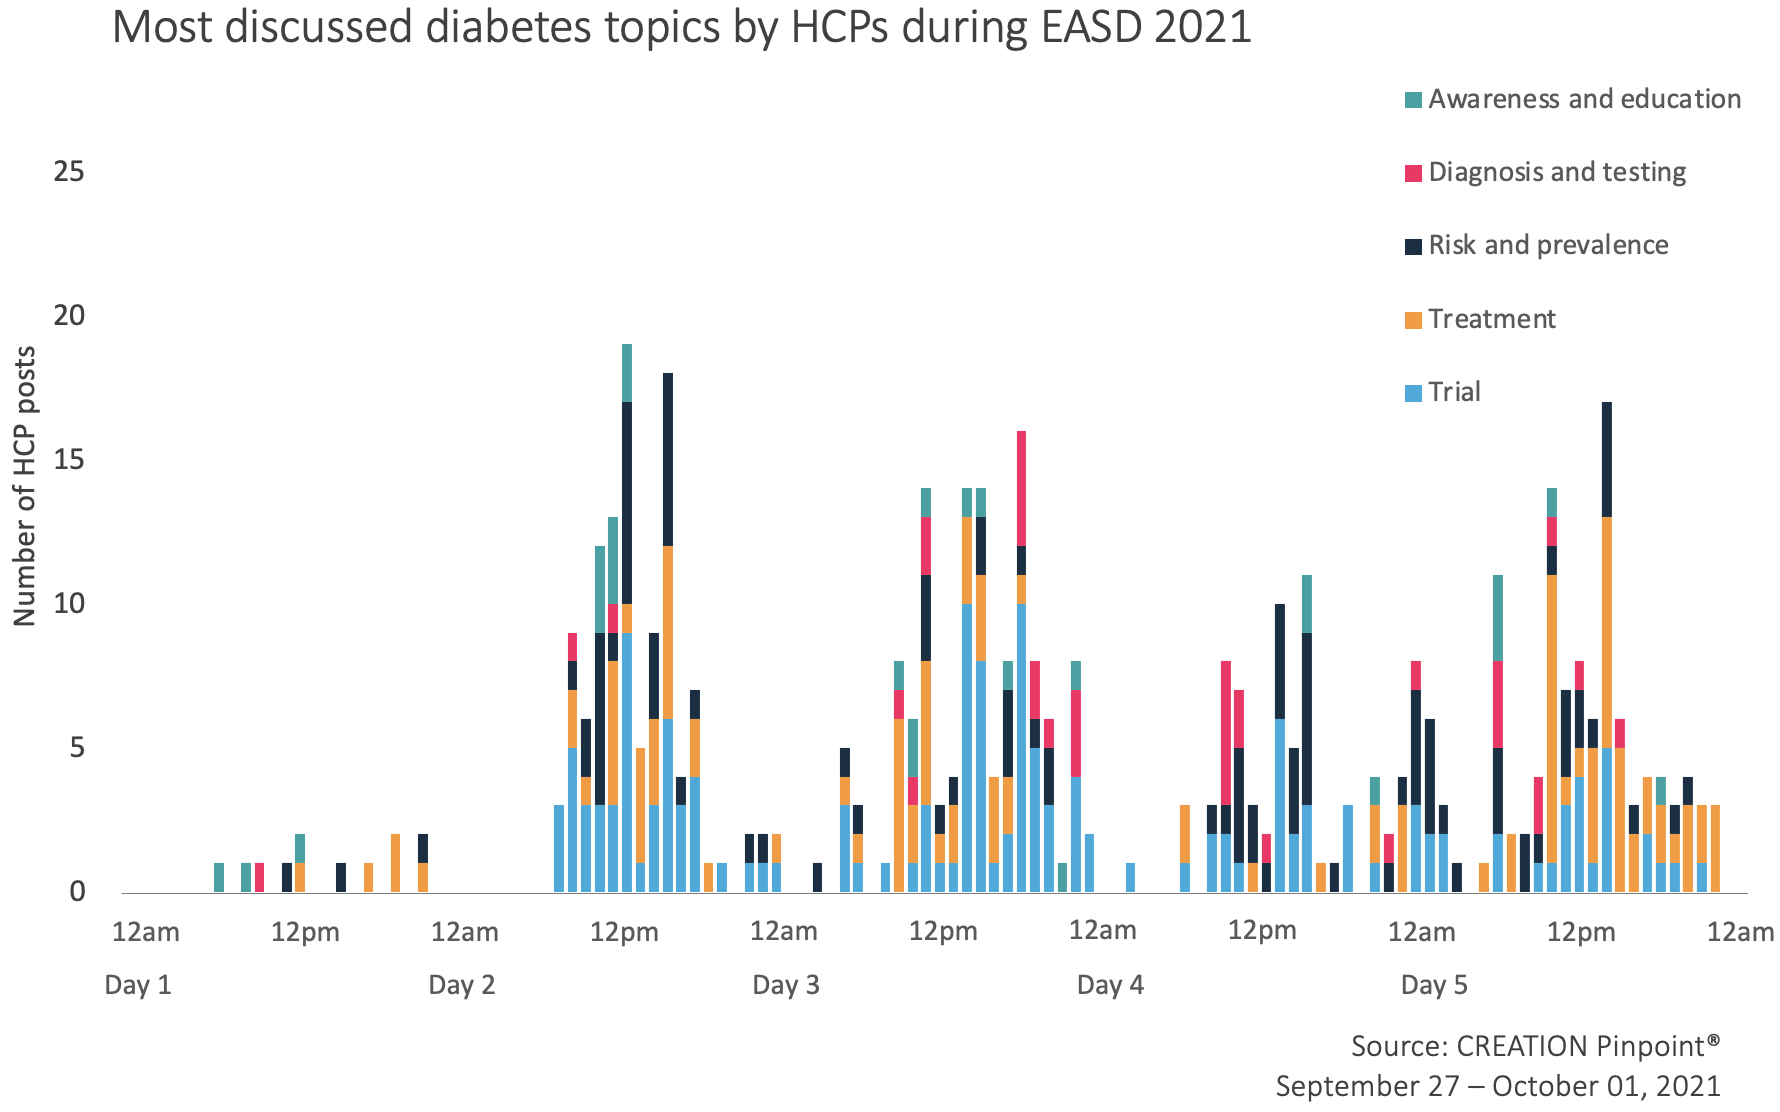 Graph showing Most discussed diabetes topics at EASD 2021 by HCPs